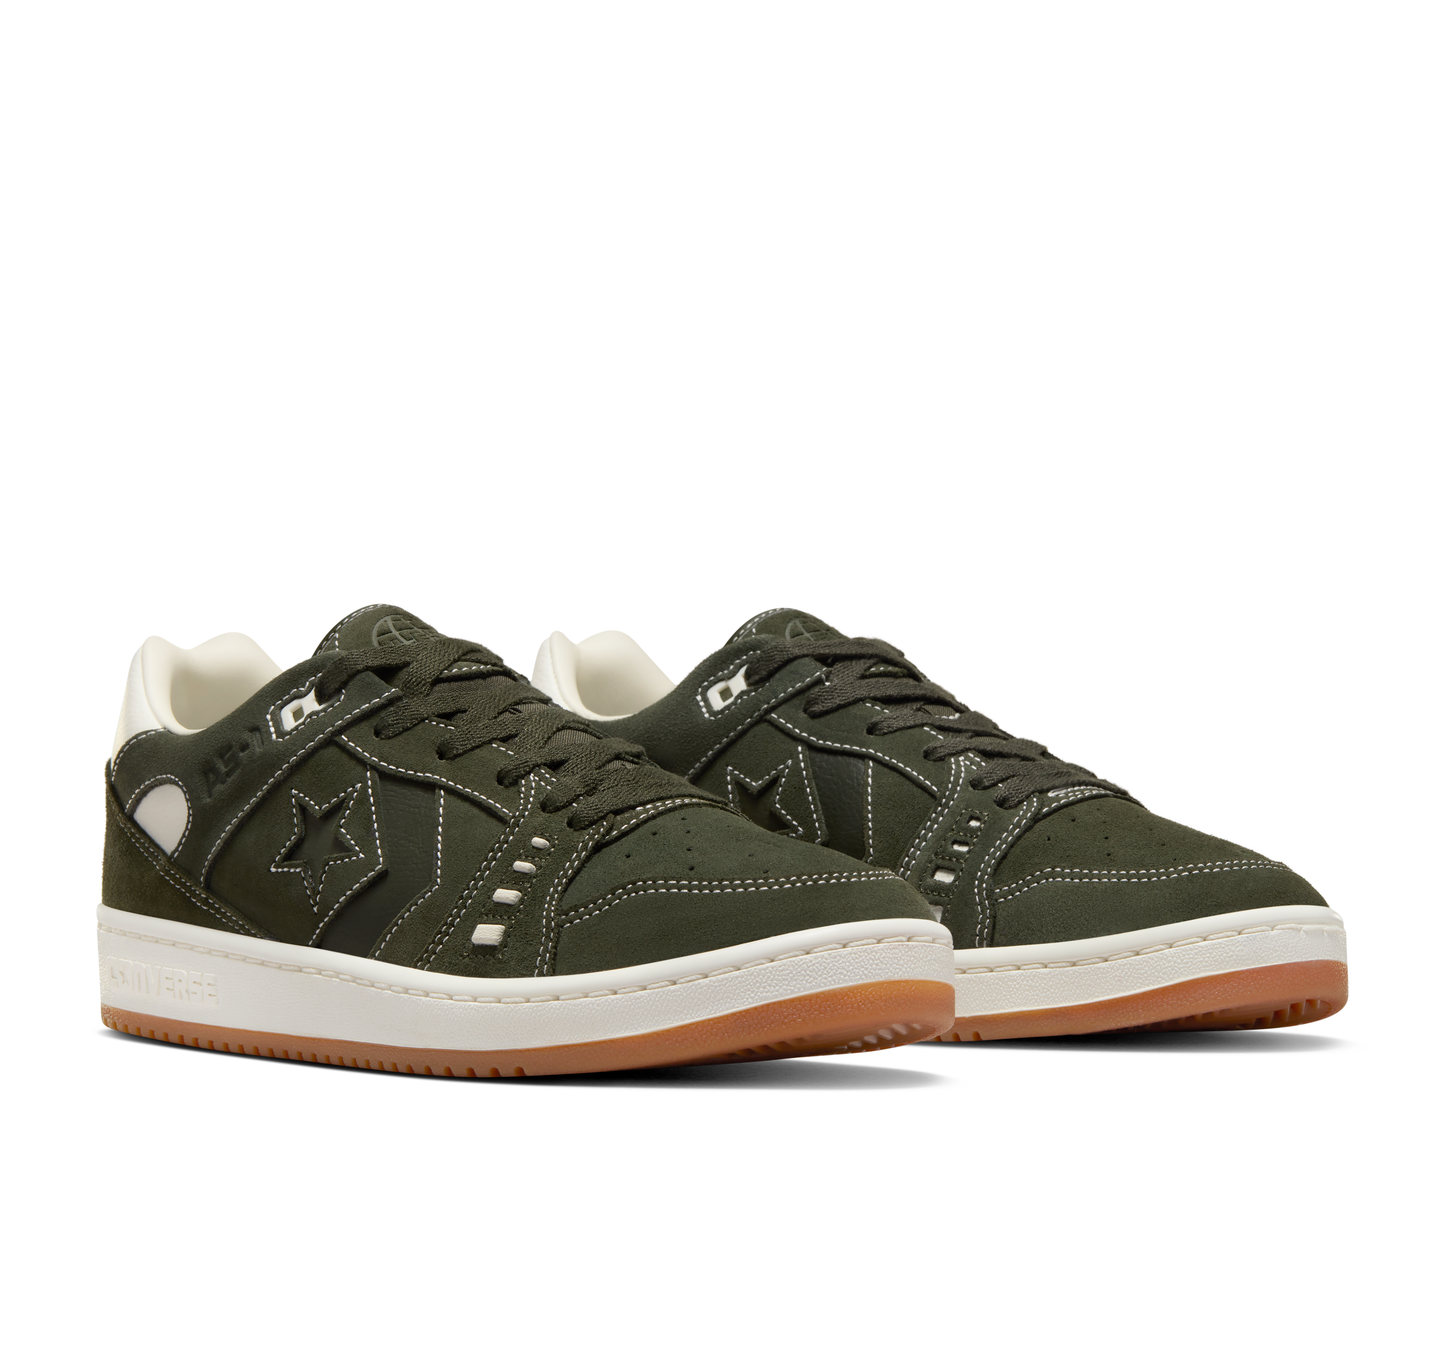 Converse AS-1 Pro OX forest shelter egret gum